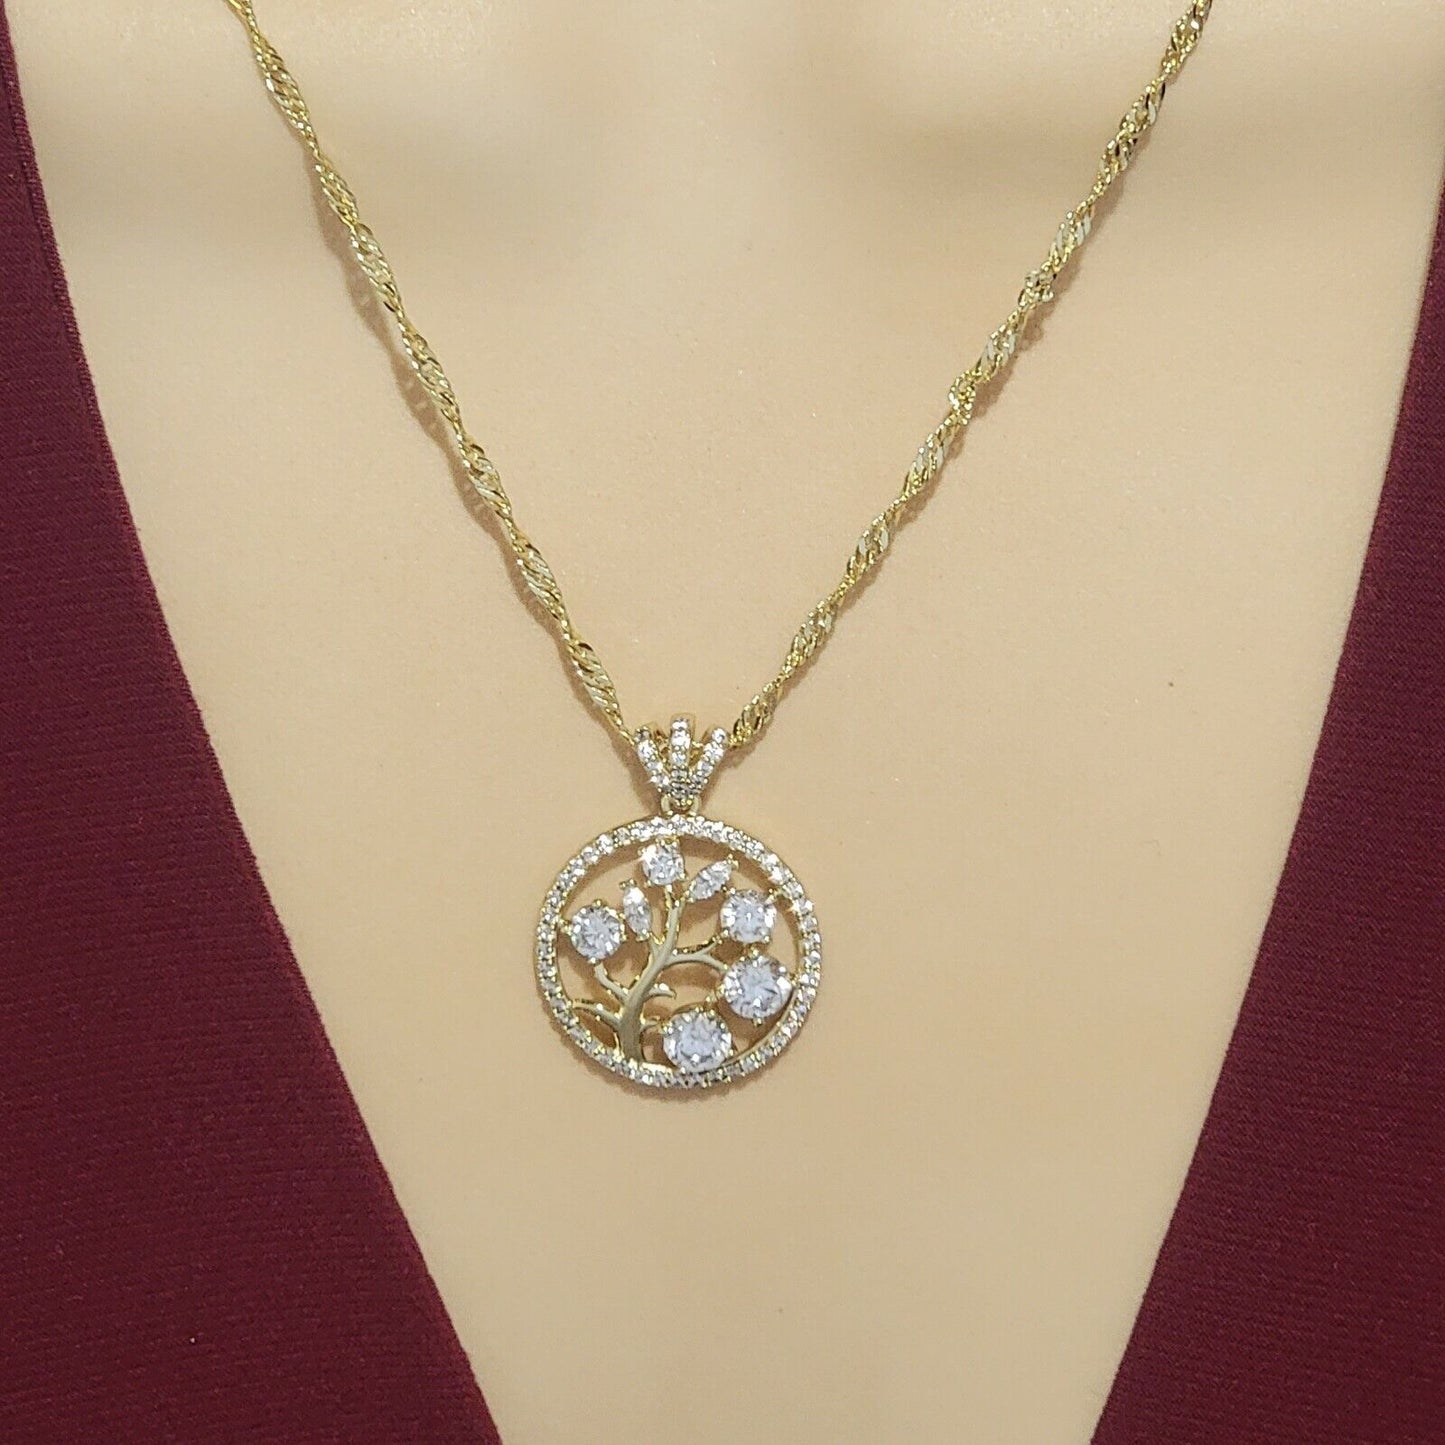 Necklaces - 14K Gold Plated. Tree of Life Pendant & Chain.